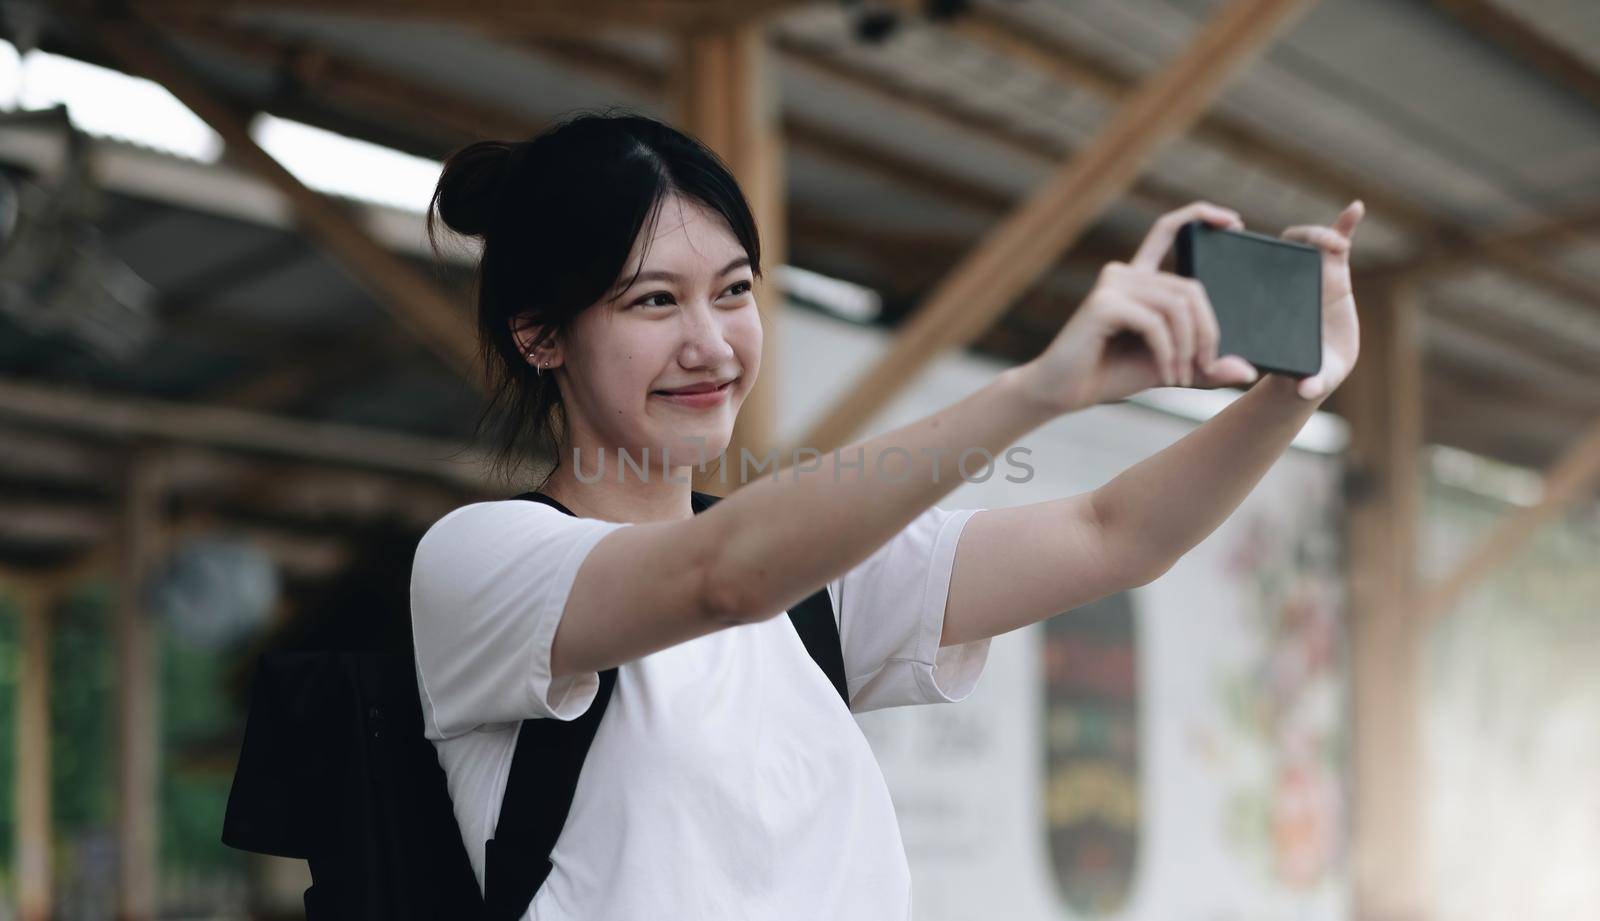 Tourist woman aling selfie with a smartphone while at the train station. Enjoying travel concept. Girl using smartphone while at the railway station platform. by wichayada